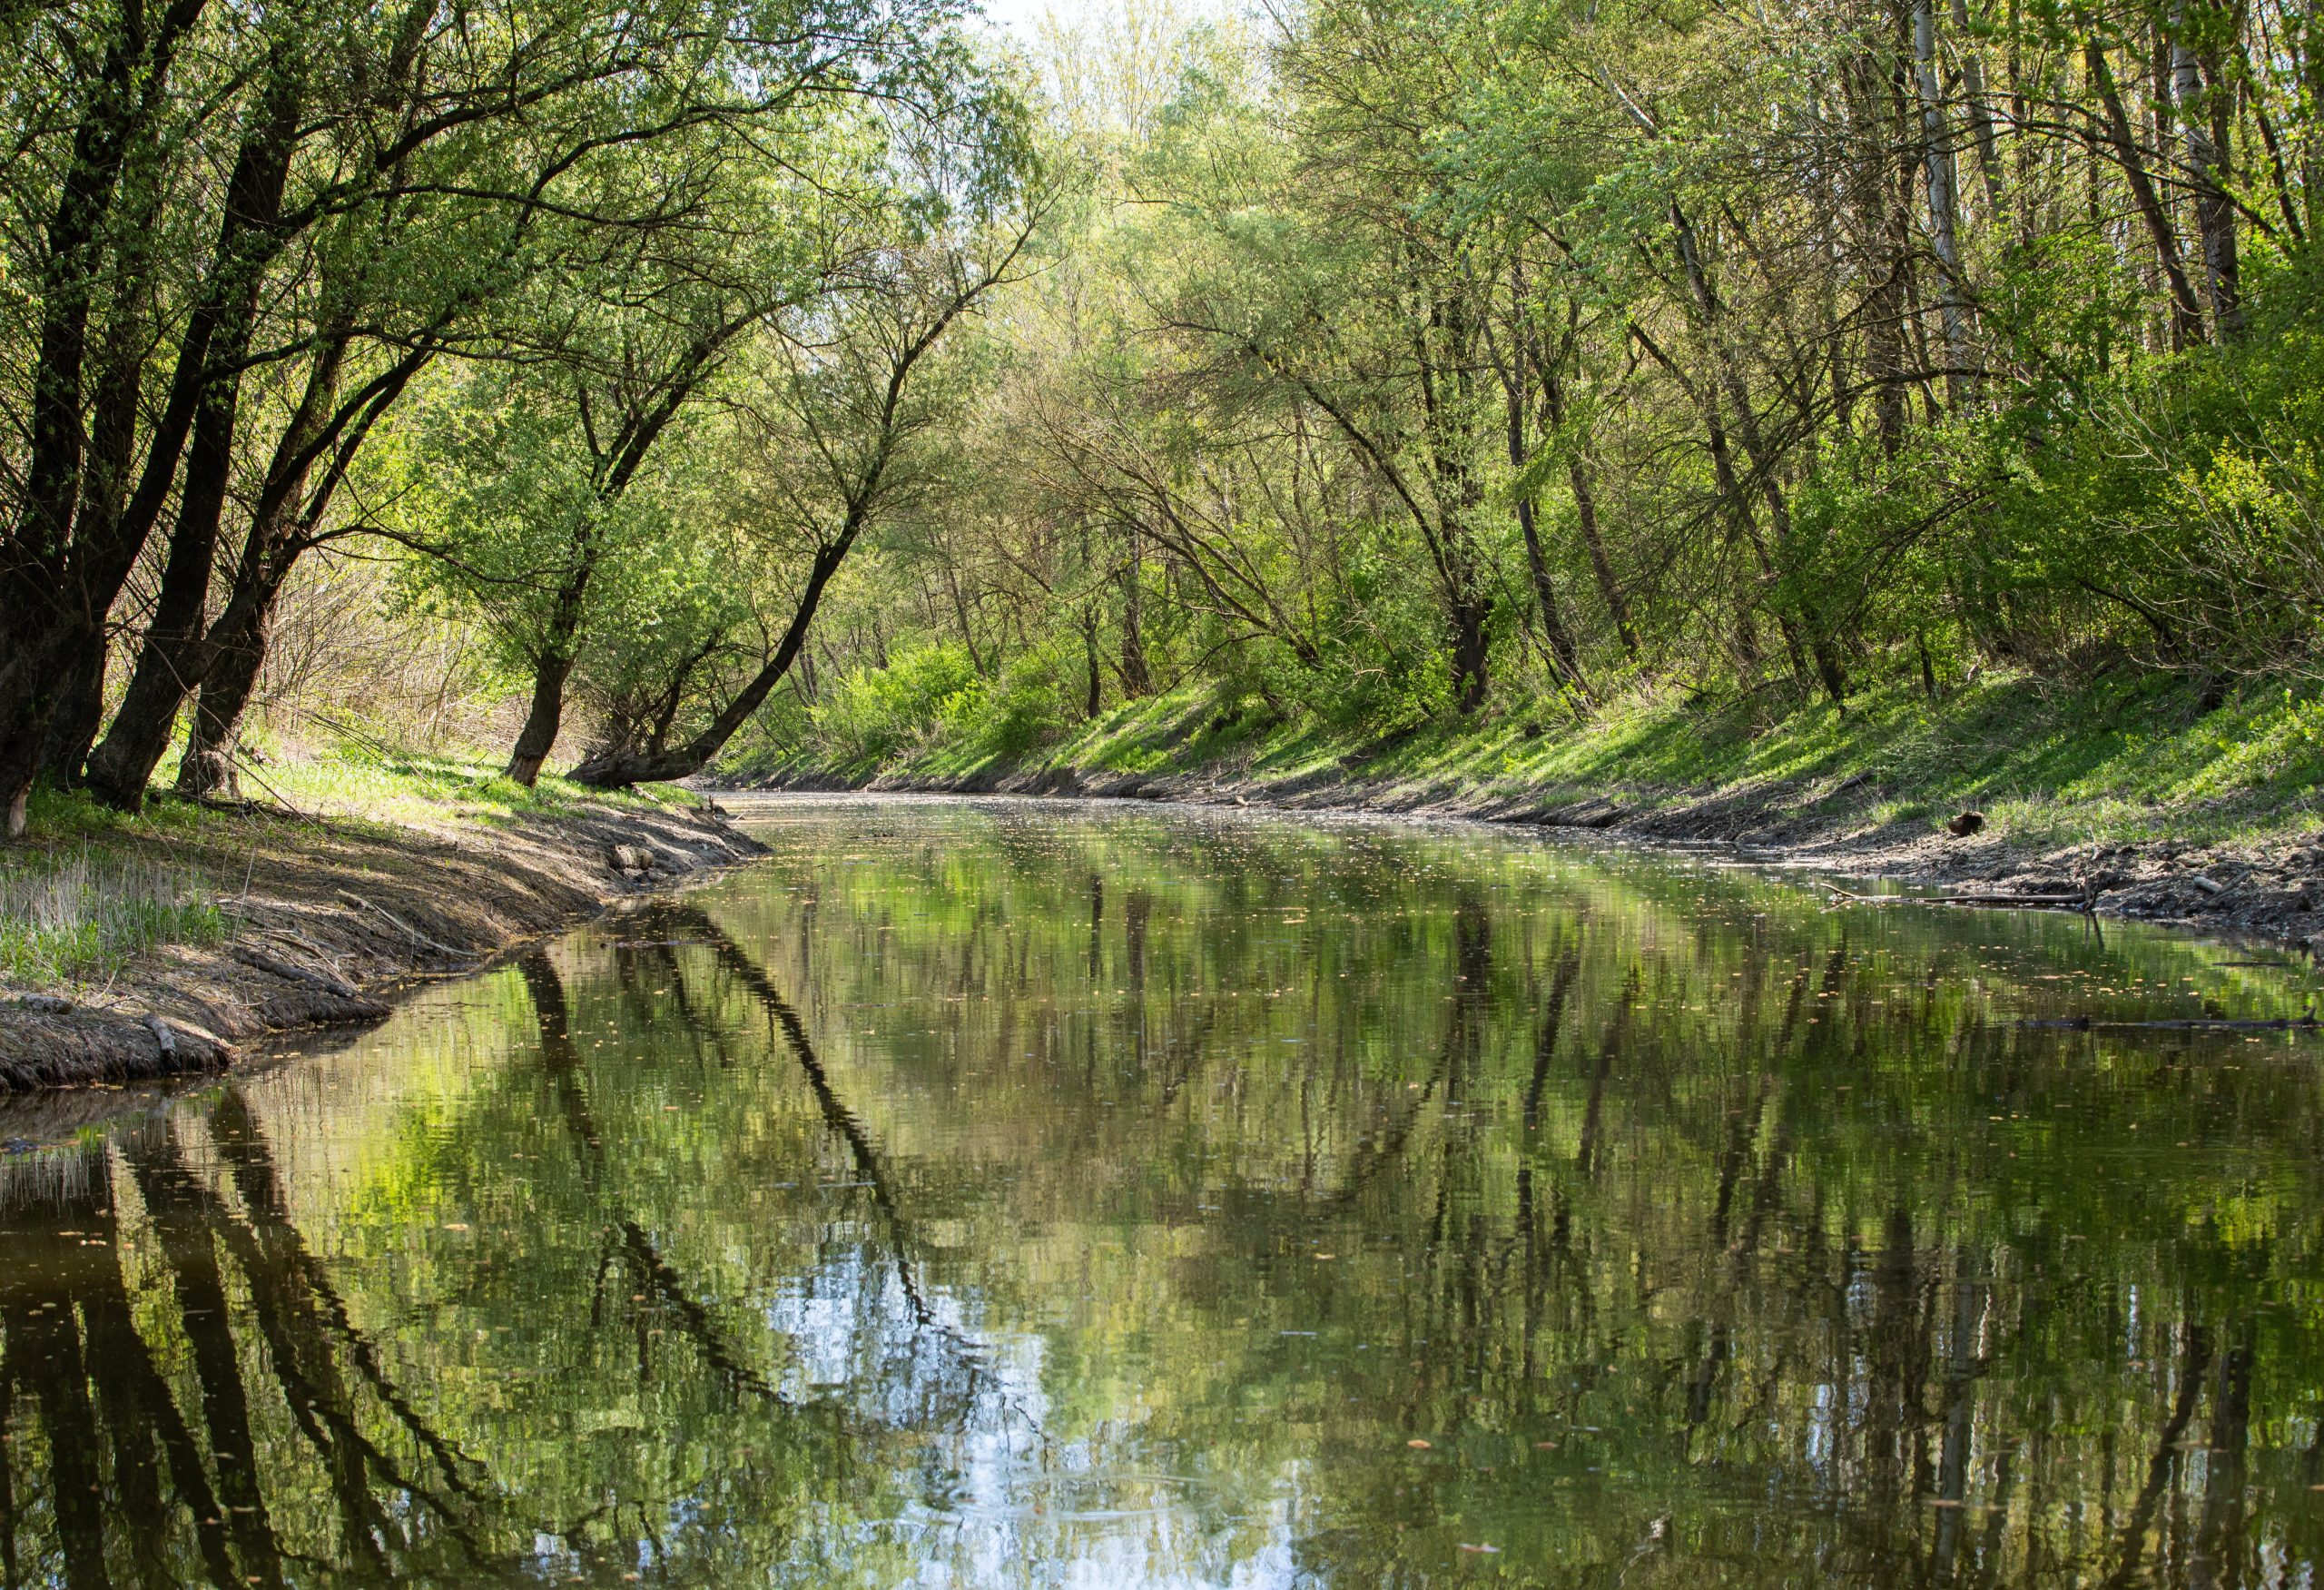 Call for Environmental Awareness on Day of Hungarian Nature